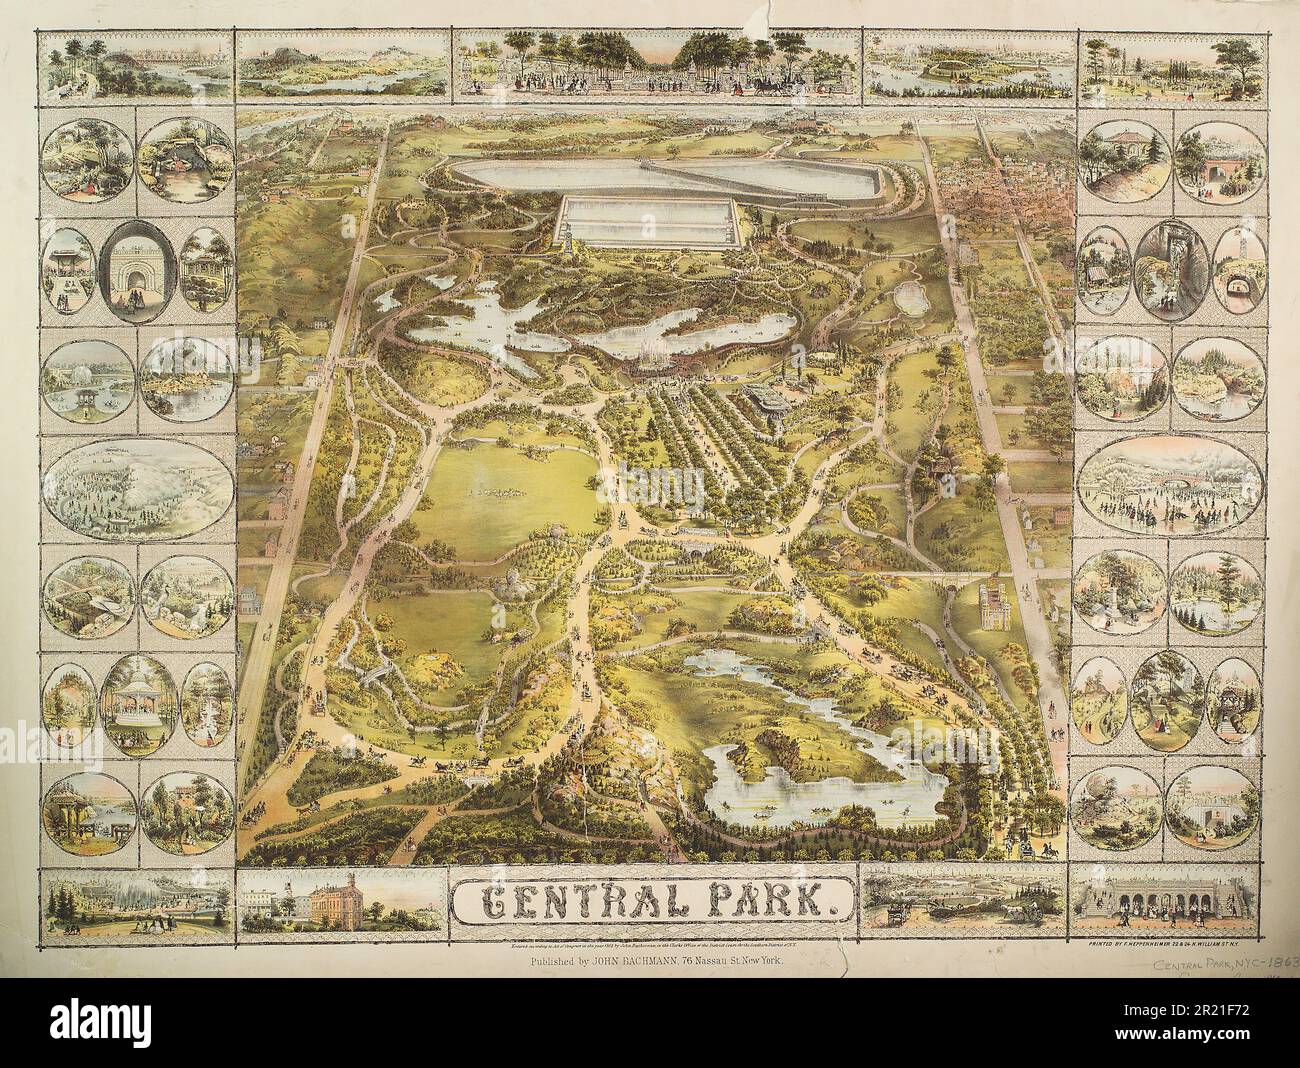 Vintage 19th century illustrated map of Central Park ca. 1863 in New York City, USA. Published by John Bachmann. Stock Photo